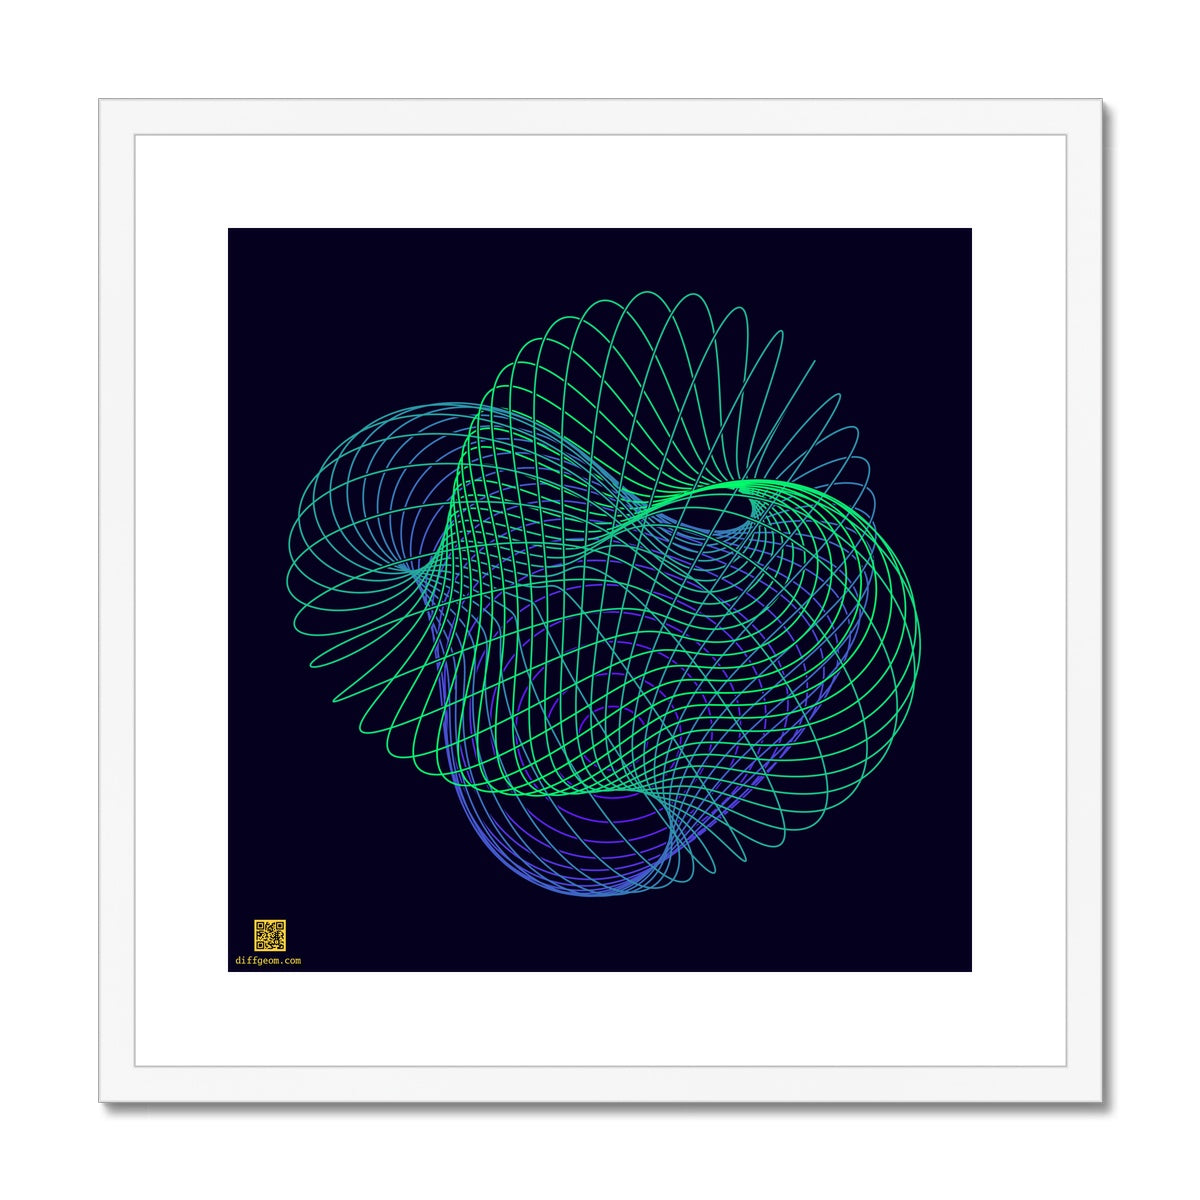 Projective Plane, Spring Framed & Mounted Print